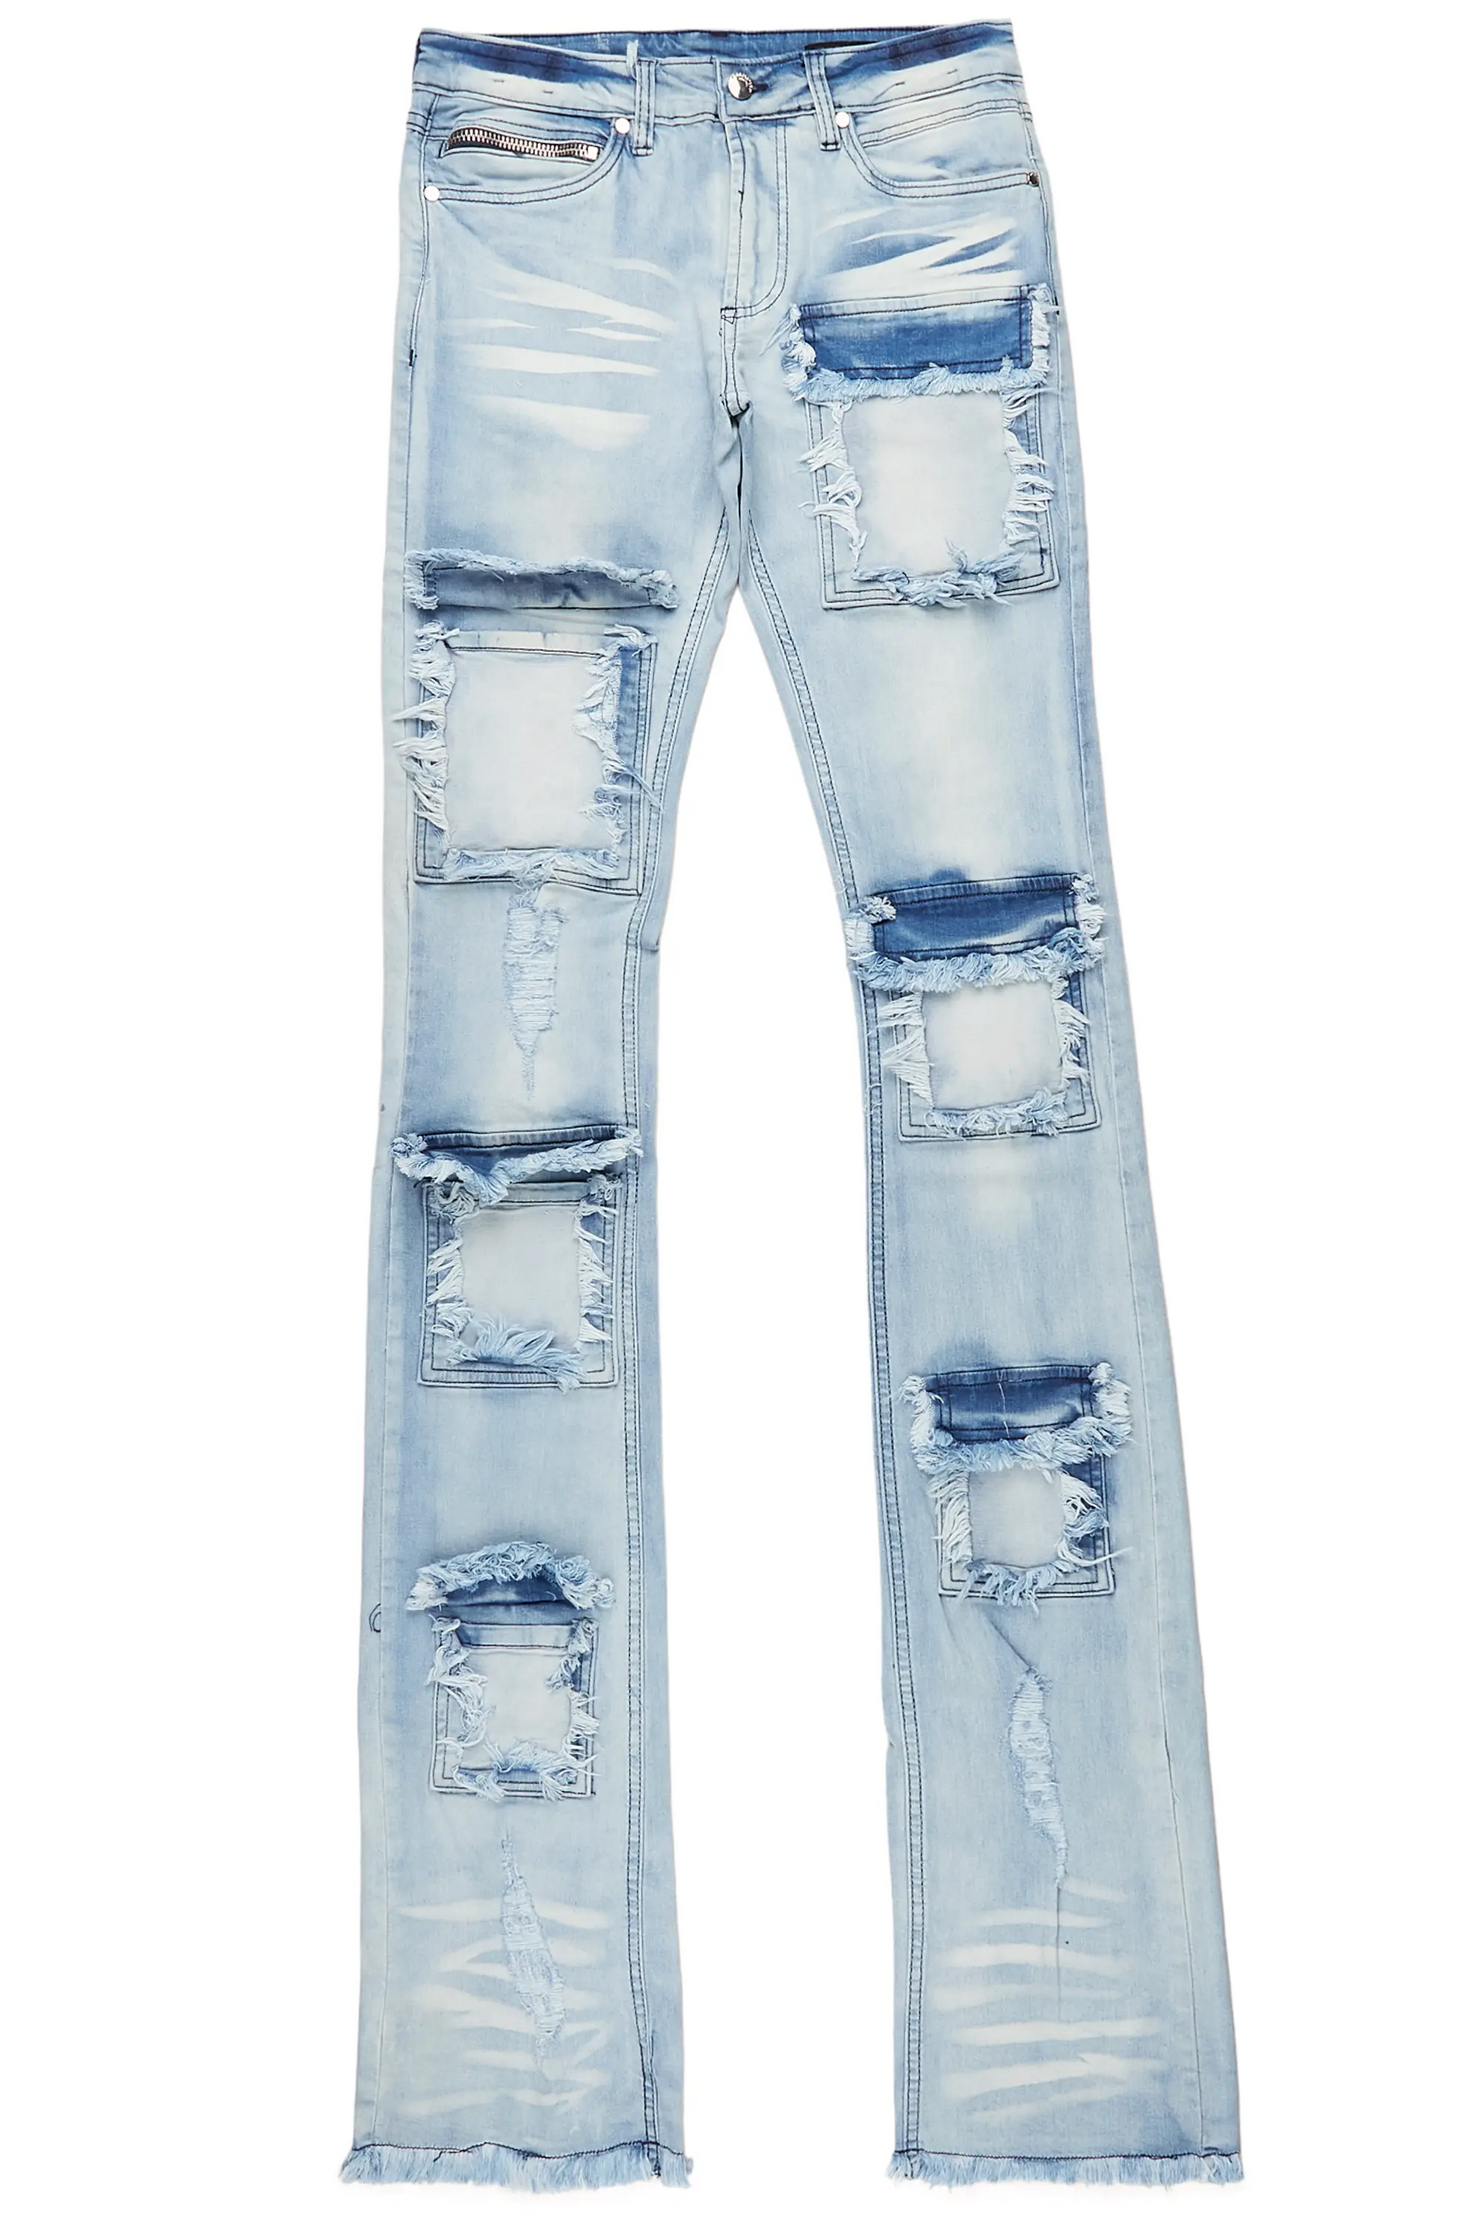 Asle Blue Super Stacked Flare Jean